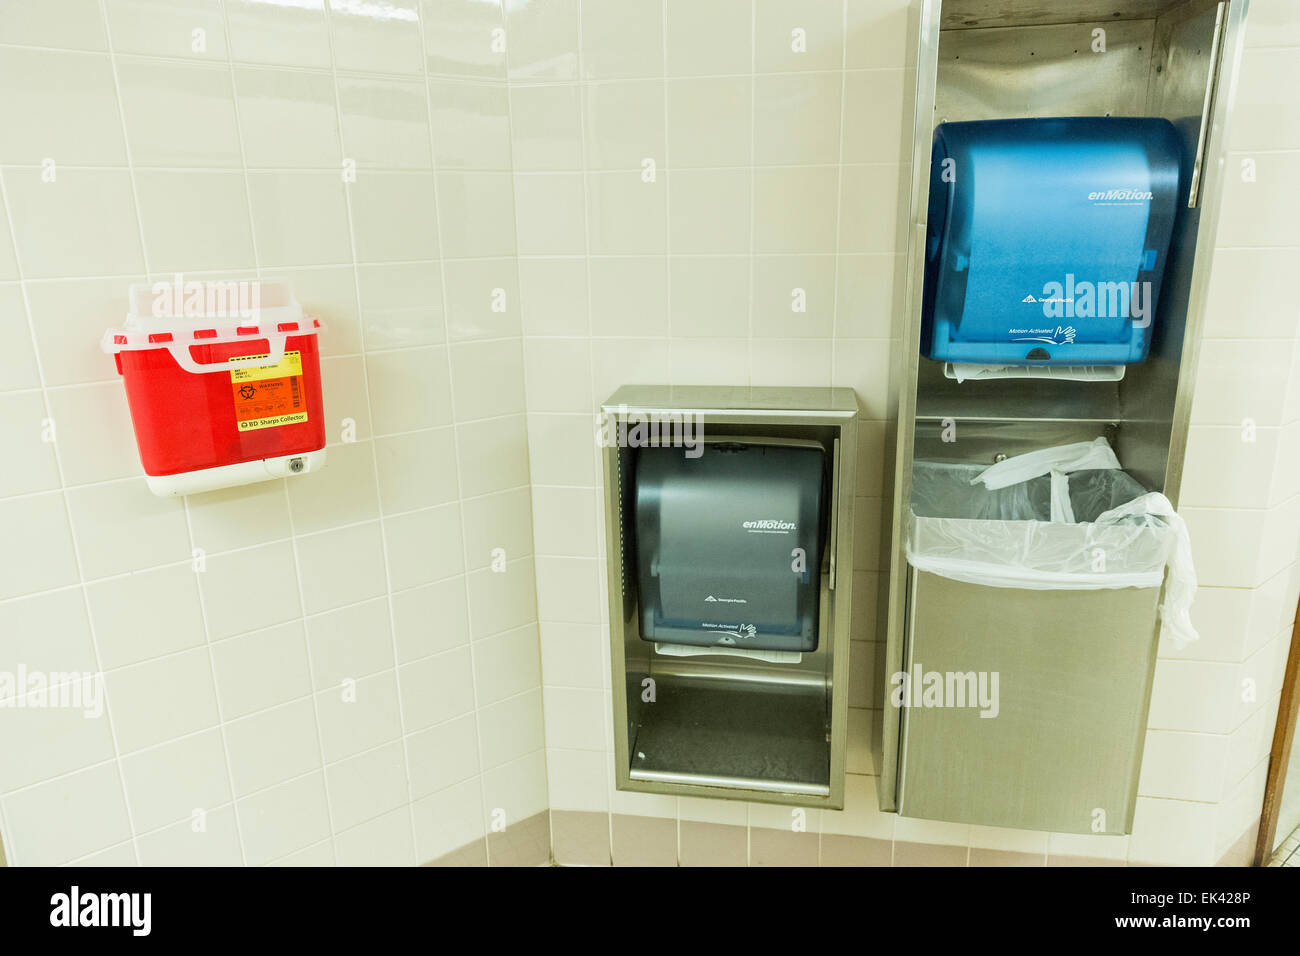 Safe needle / hazardous material disposal box and paper towel dispensers mounted on the wall in the public restroom Stock Photo